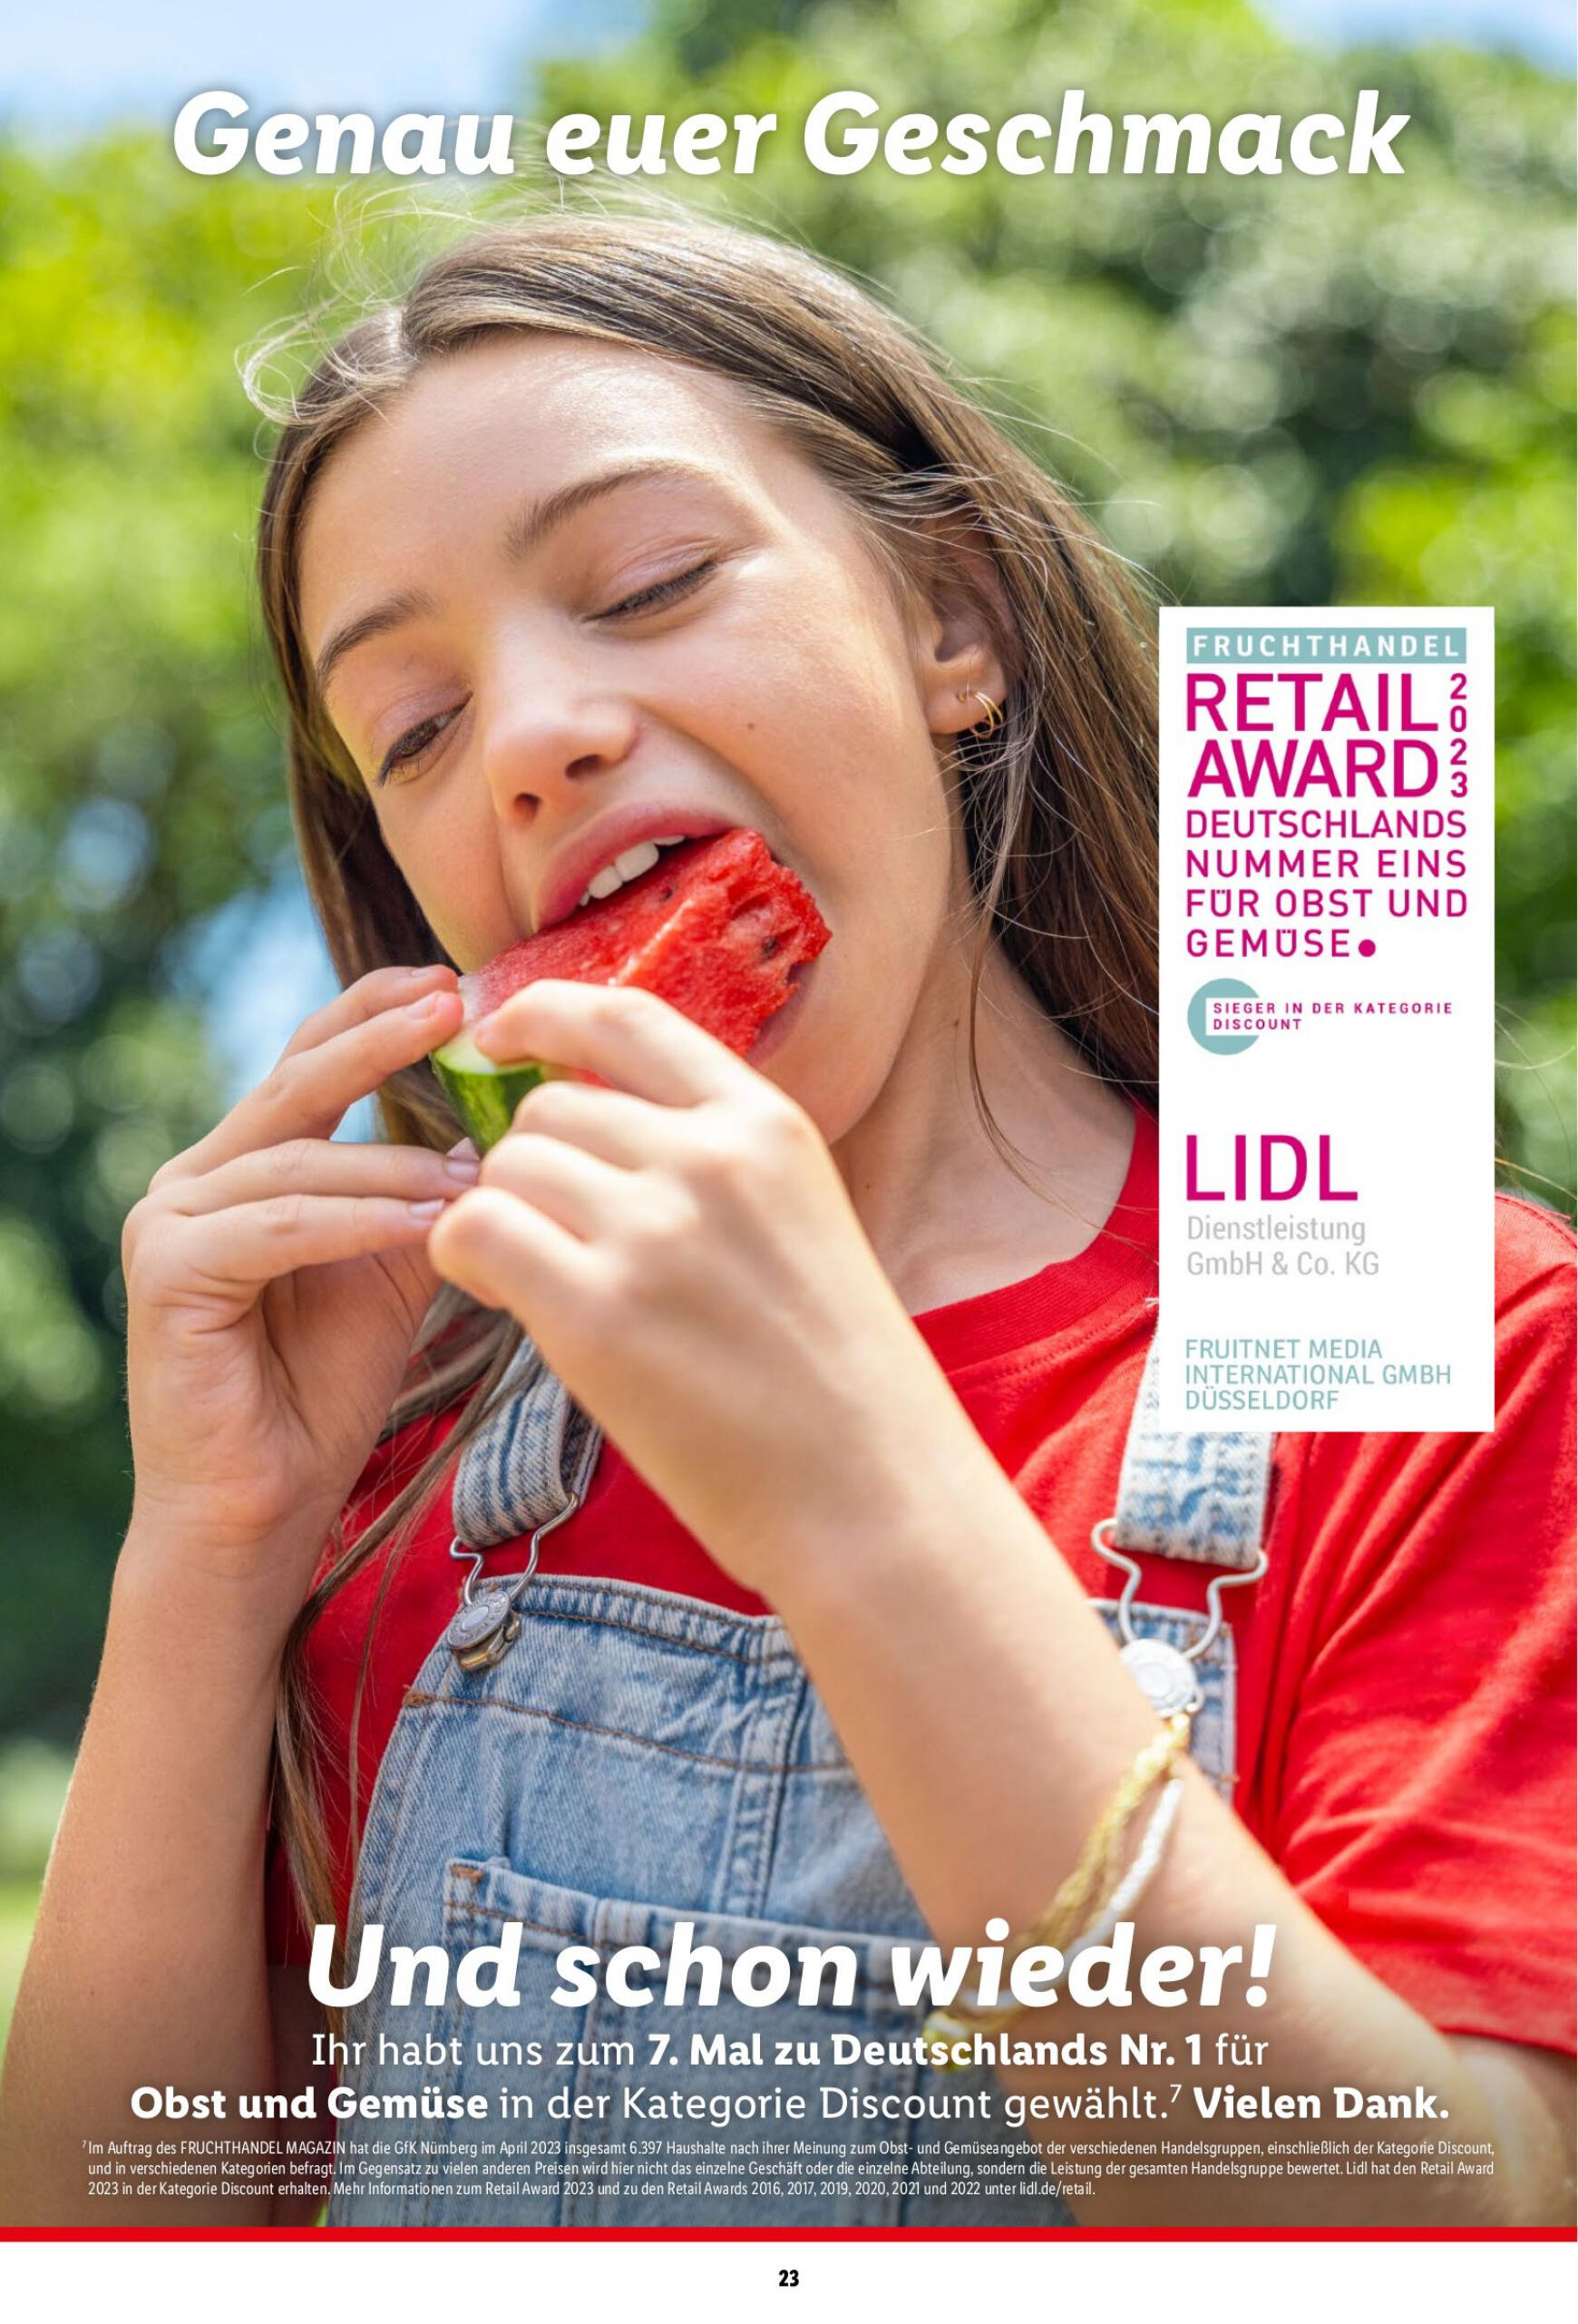 lidl - Flyer Lidl - Grillmagazin aktuell 22.04. - 30.06. - page: 23